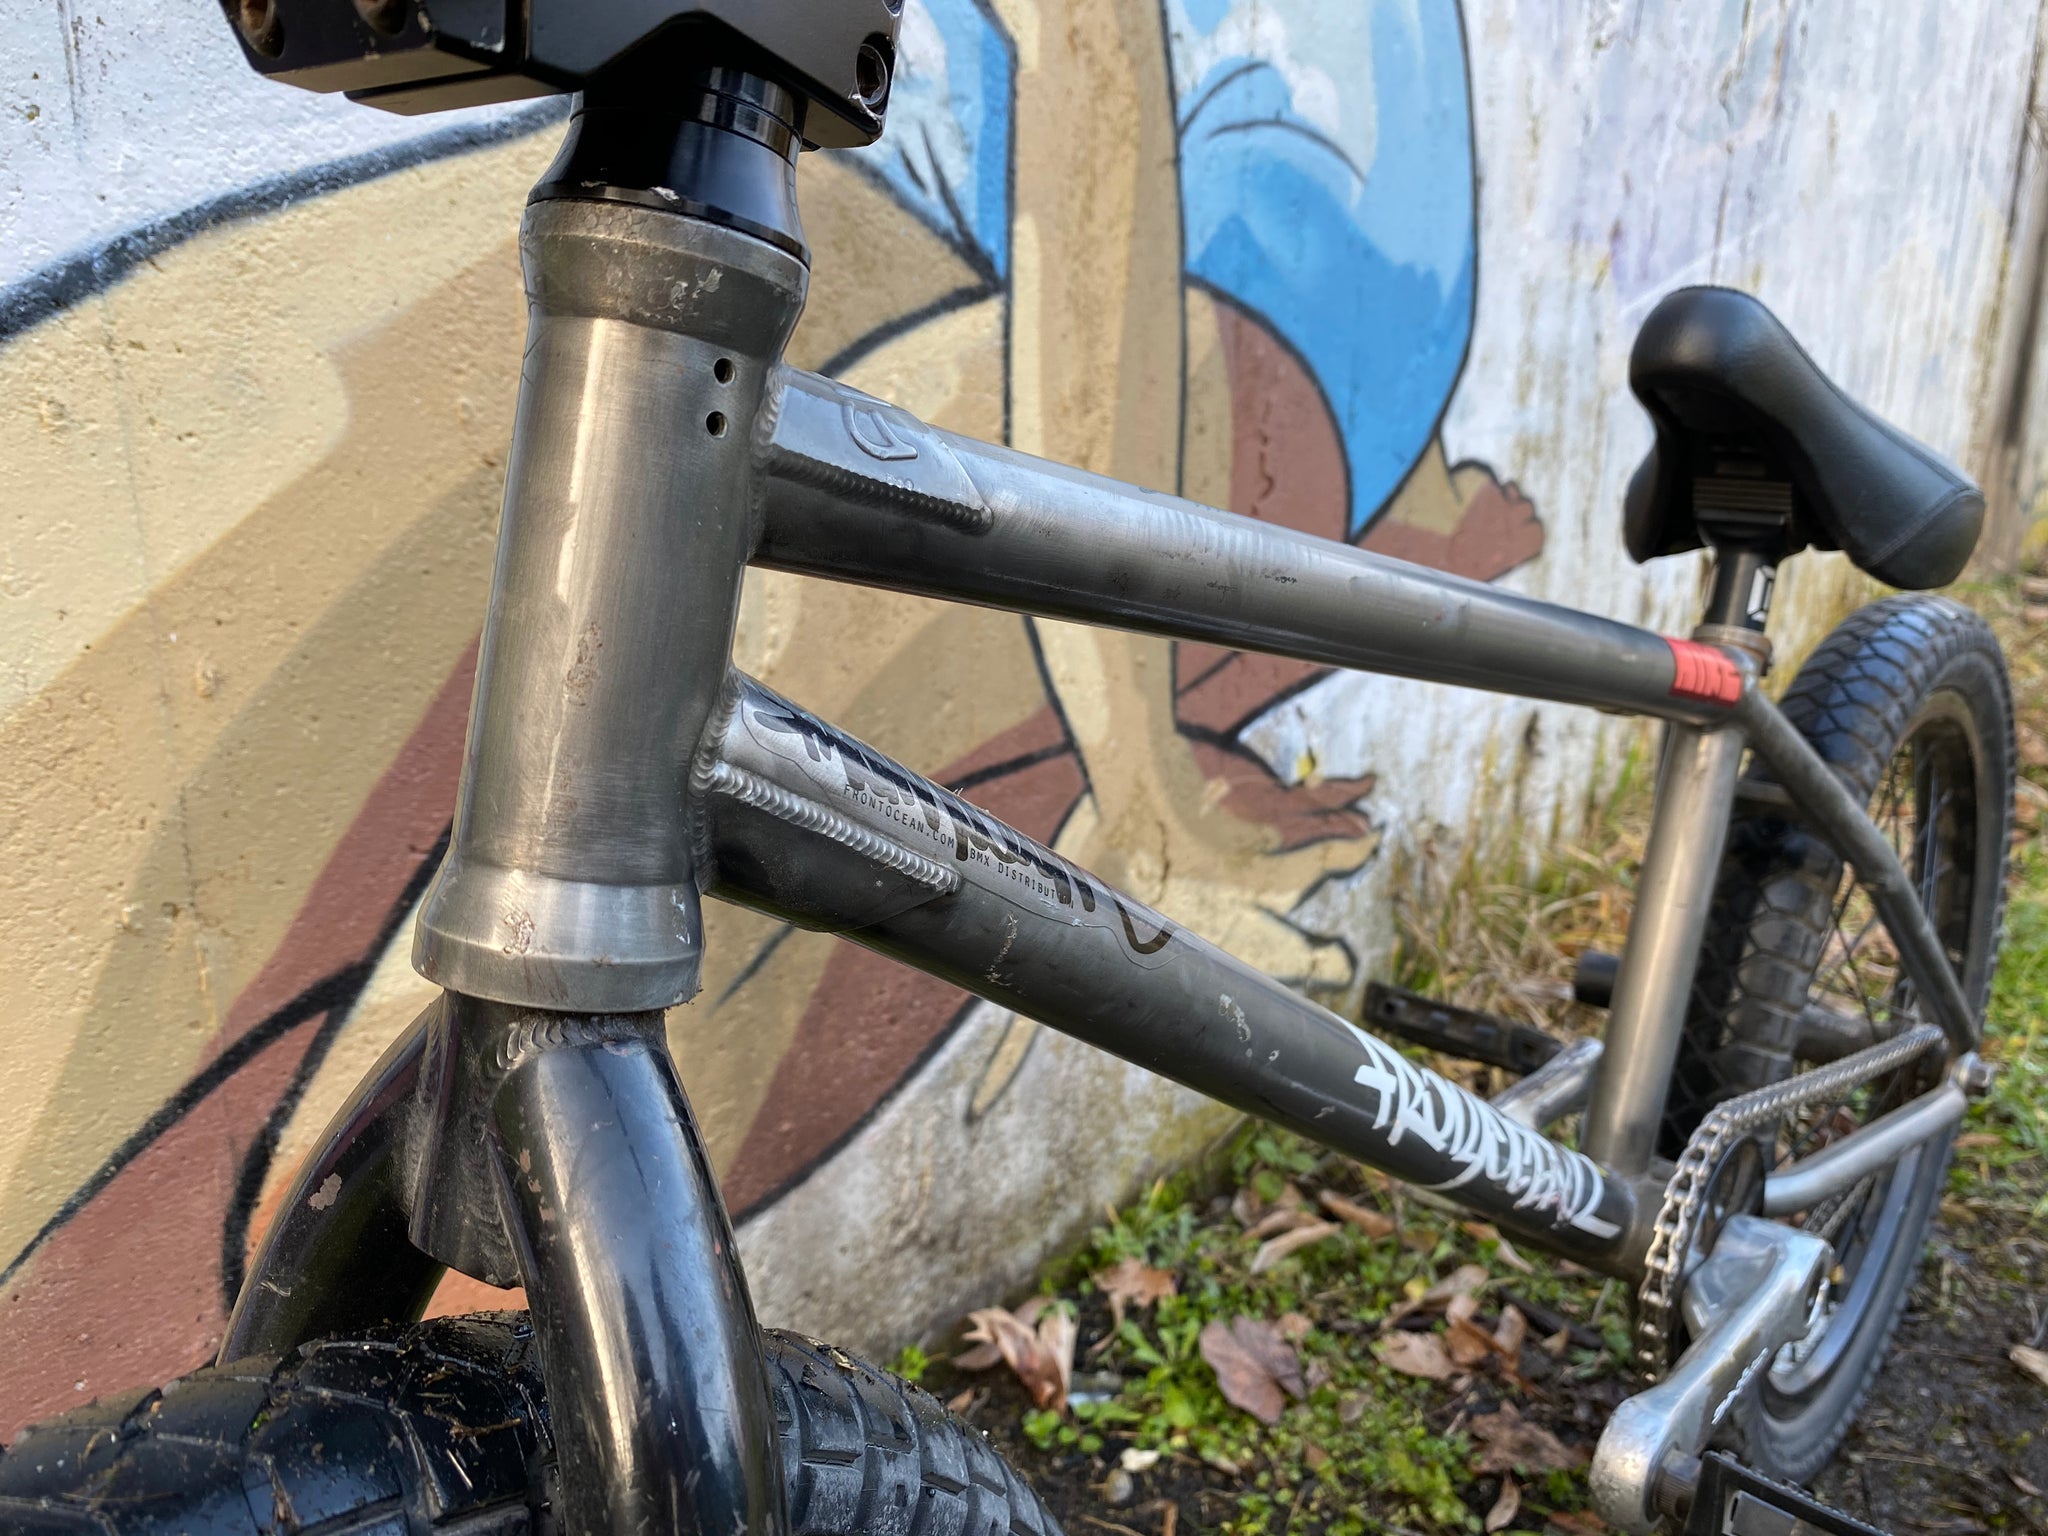 massimo crotti bike check frontocean bmx cult odyssey gsport sunday subrosa fiend flybikes kink